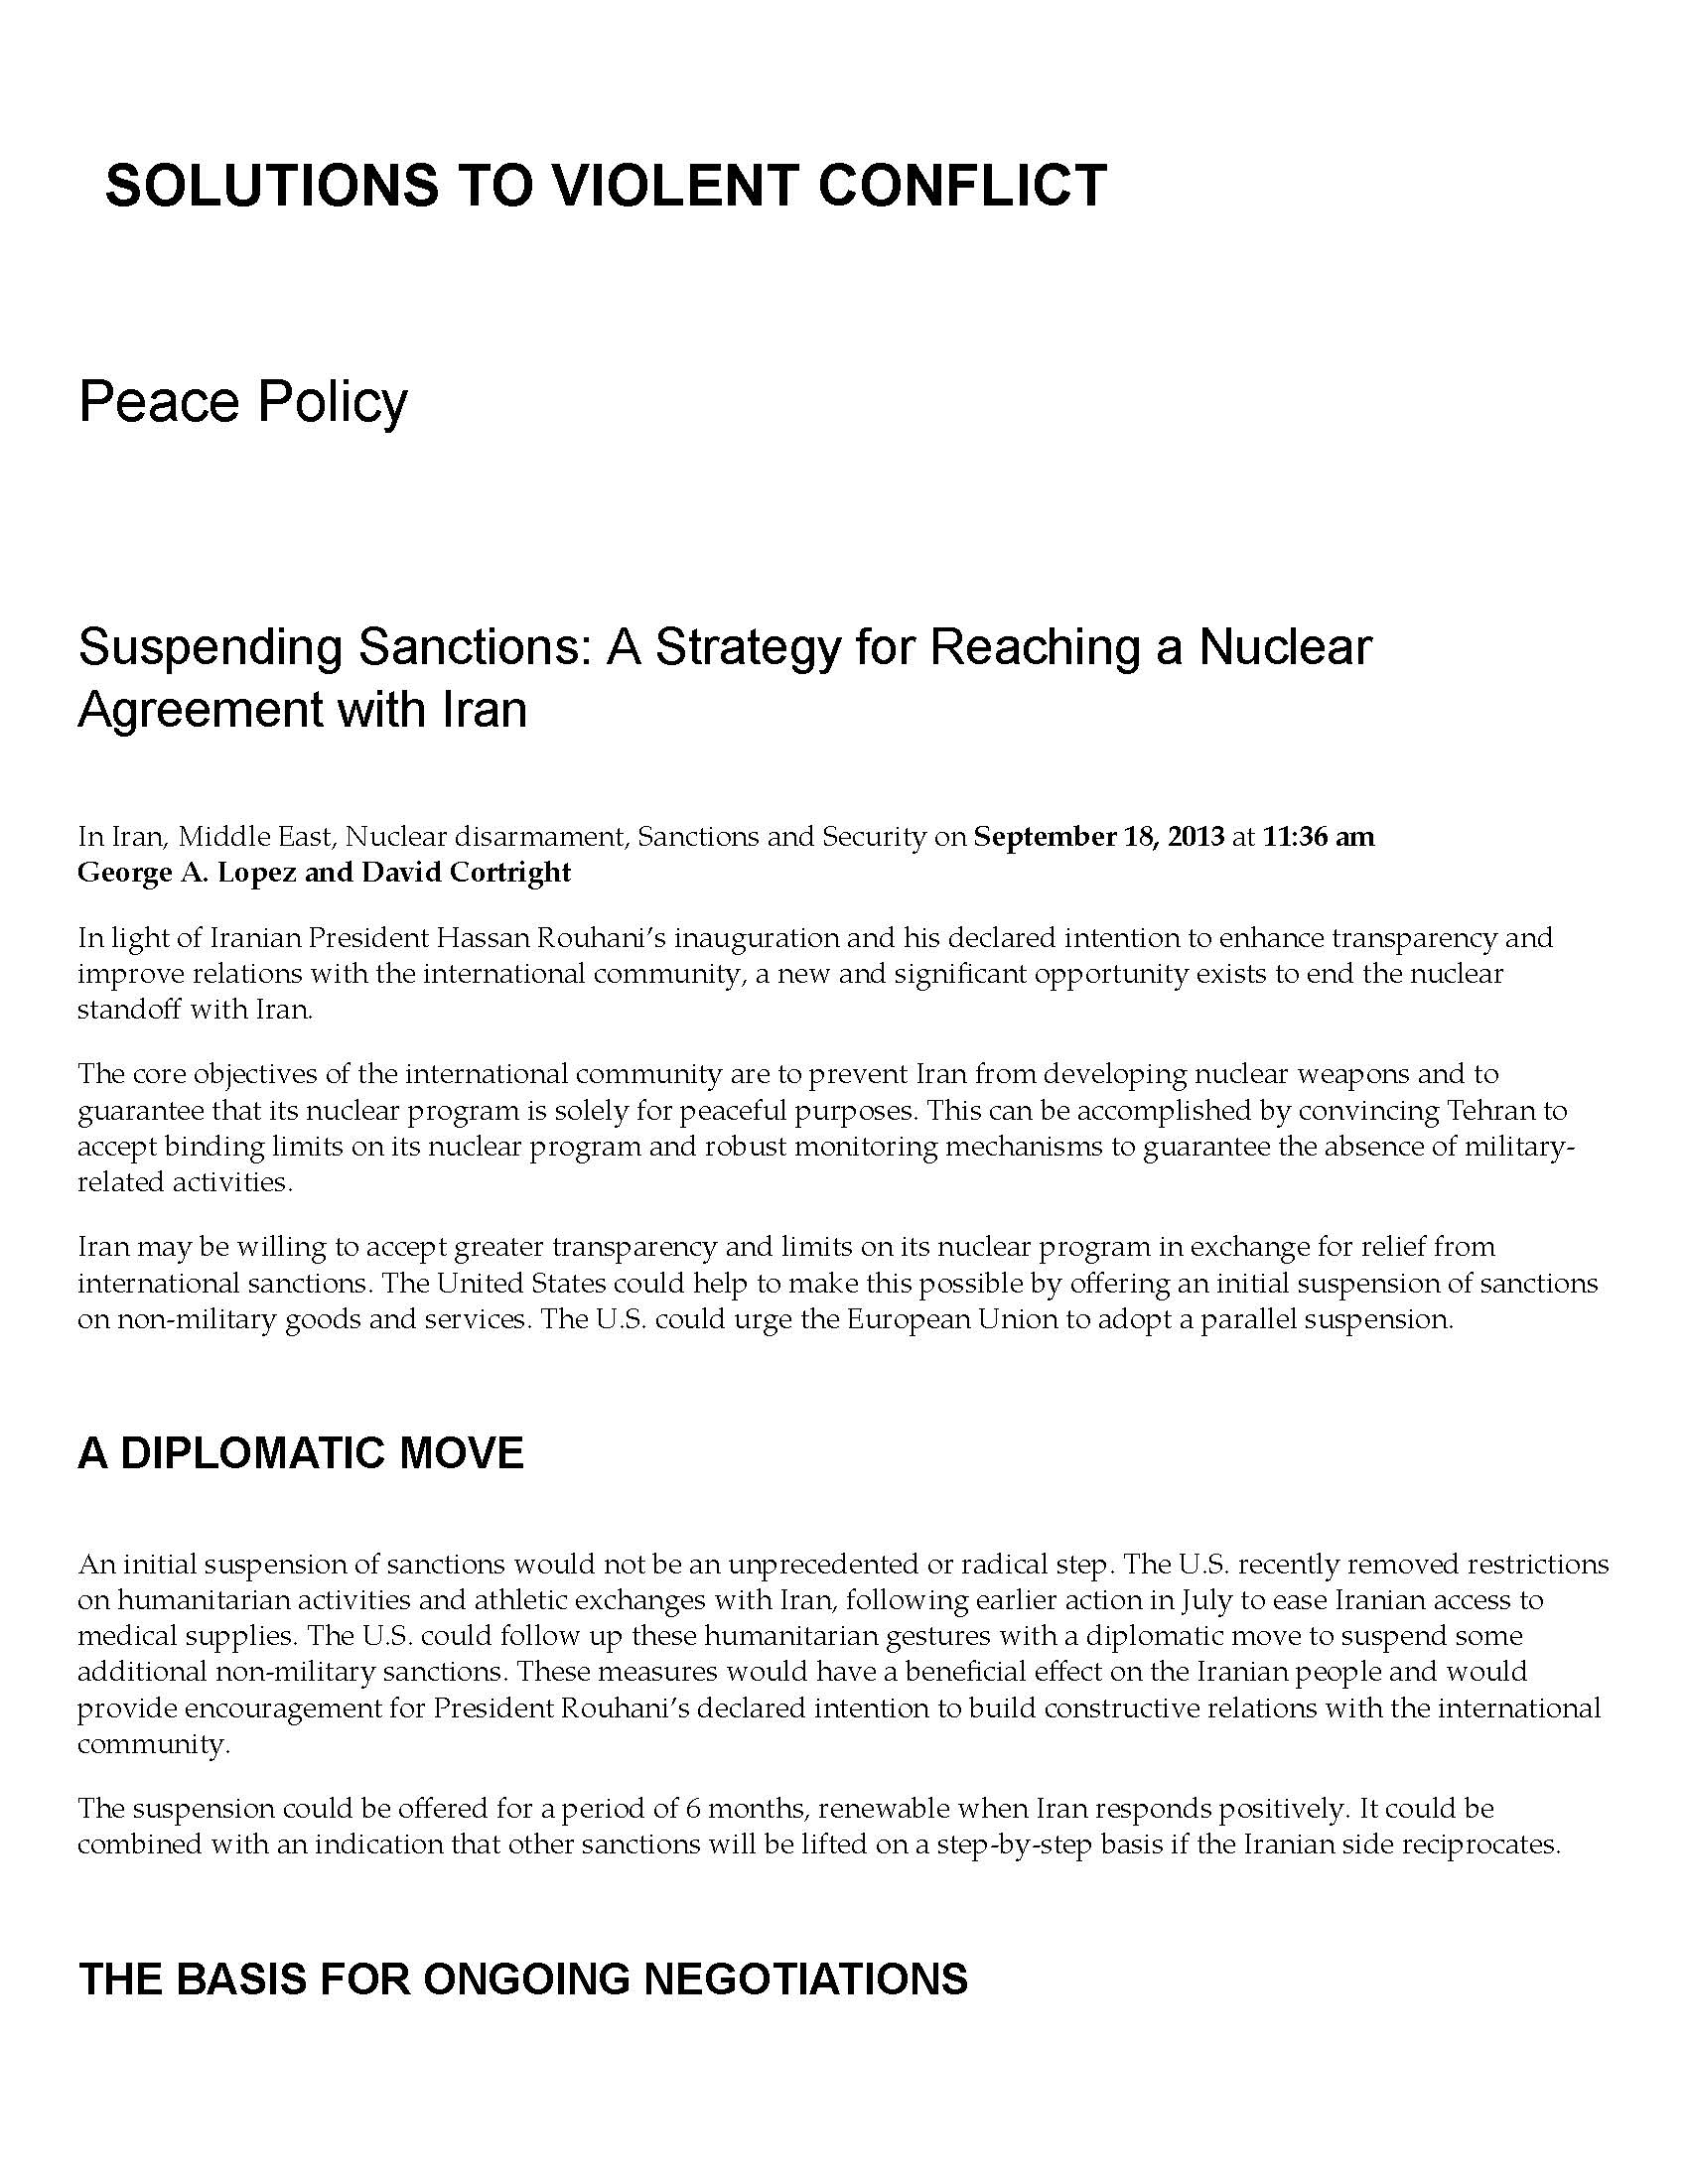 Suspending Sanctions: A Strategy for Reaching Diplomatic Agreement with Iran